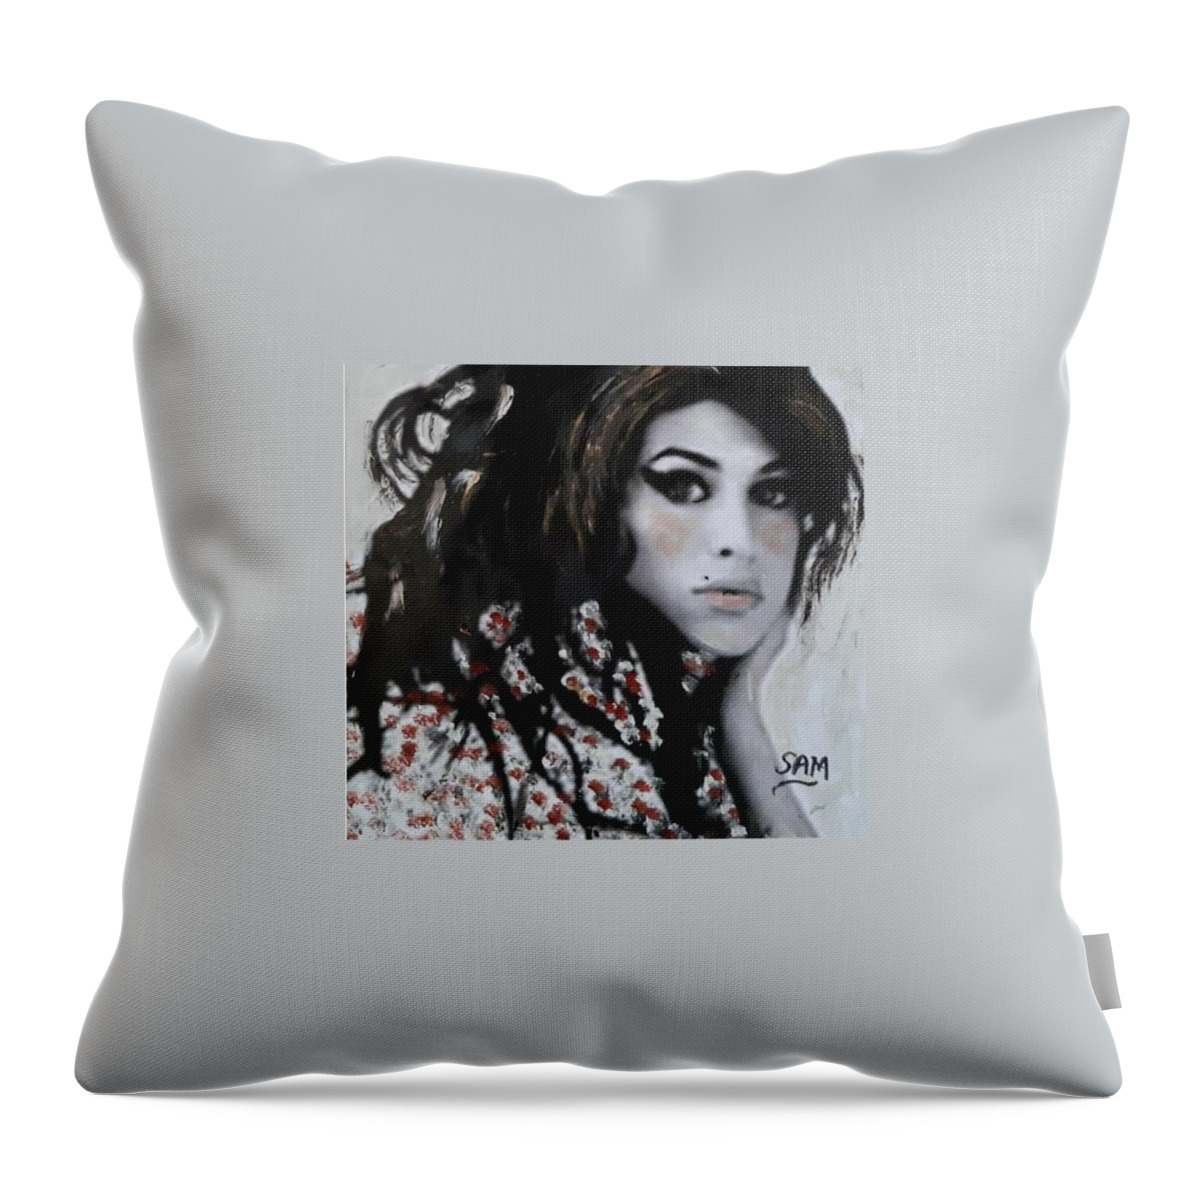 Amy Throw Pillow featuring the painting Amy by Sam Shaker